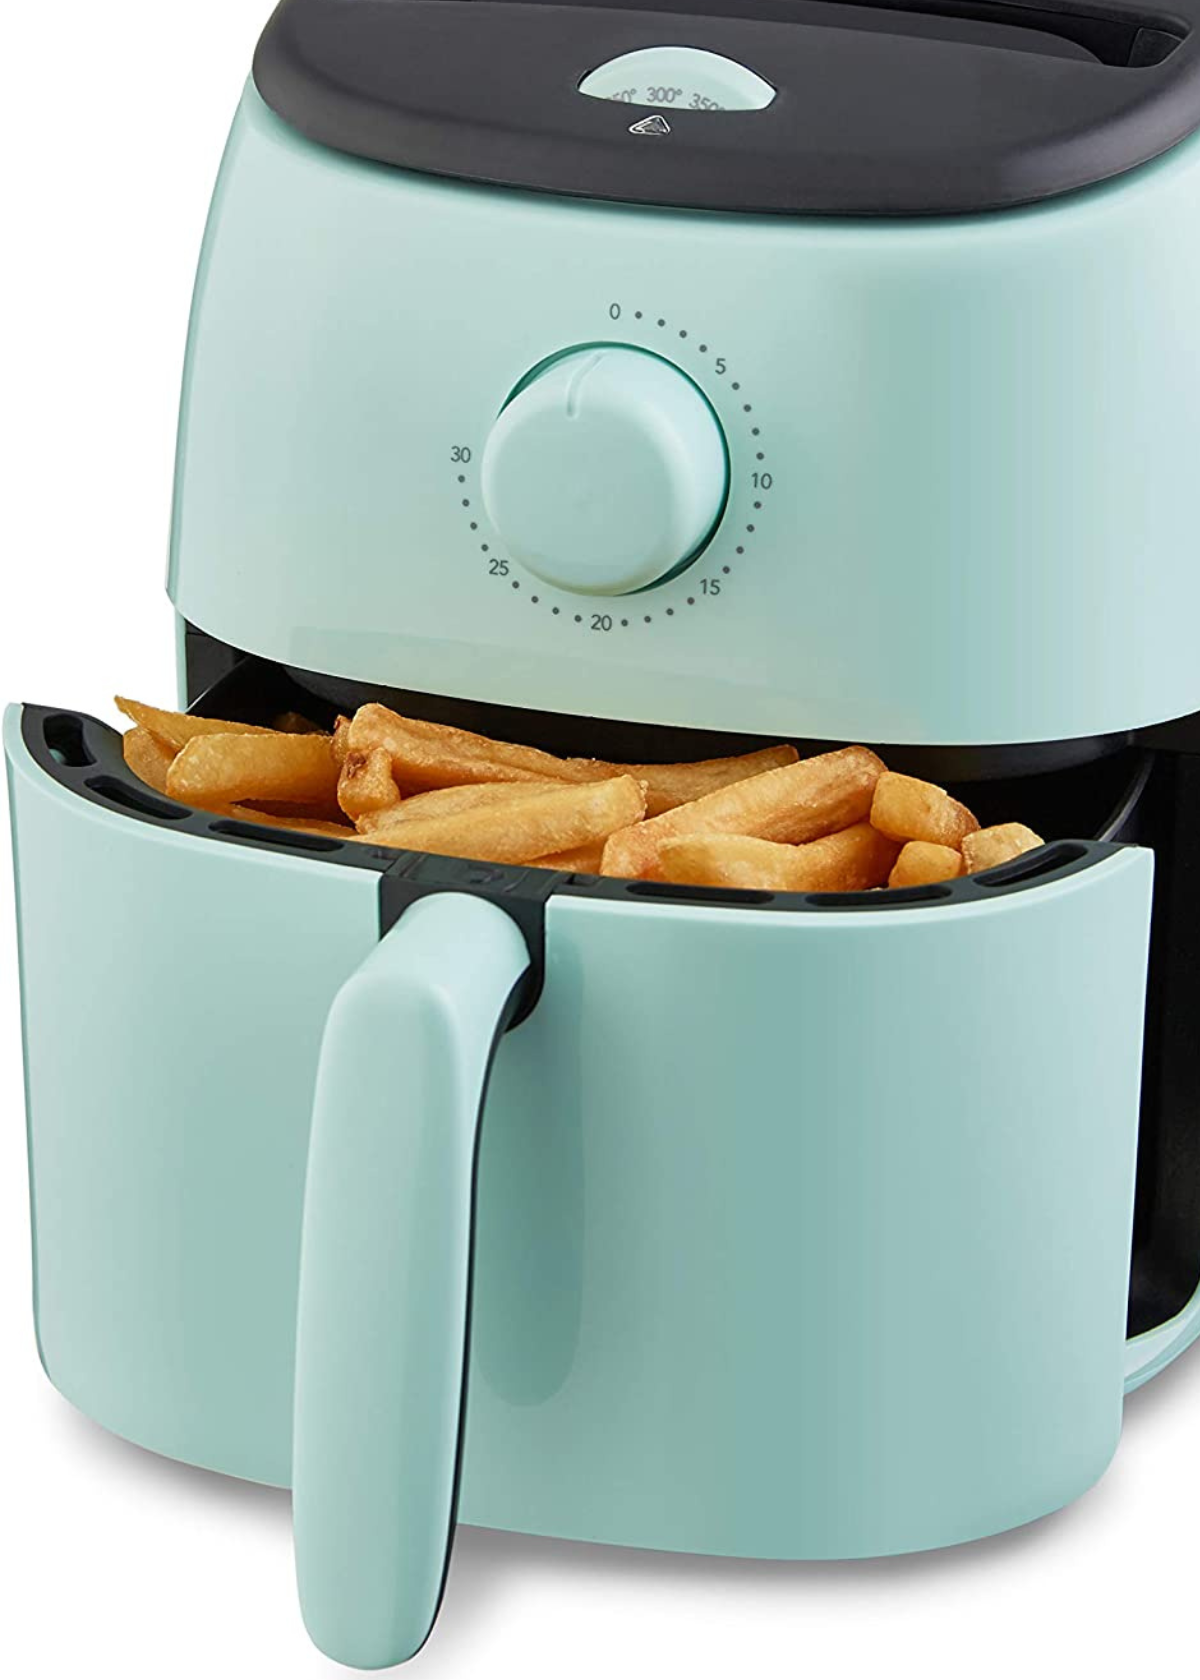 Best Turquoise Air Fryer: Refreshing Look For Your Kitchen